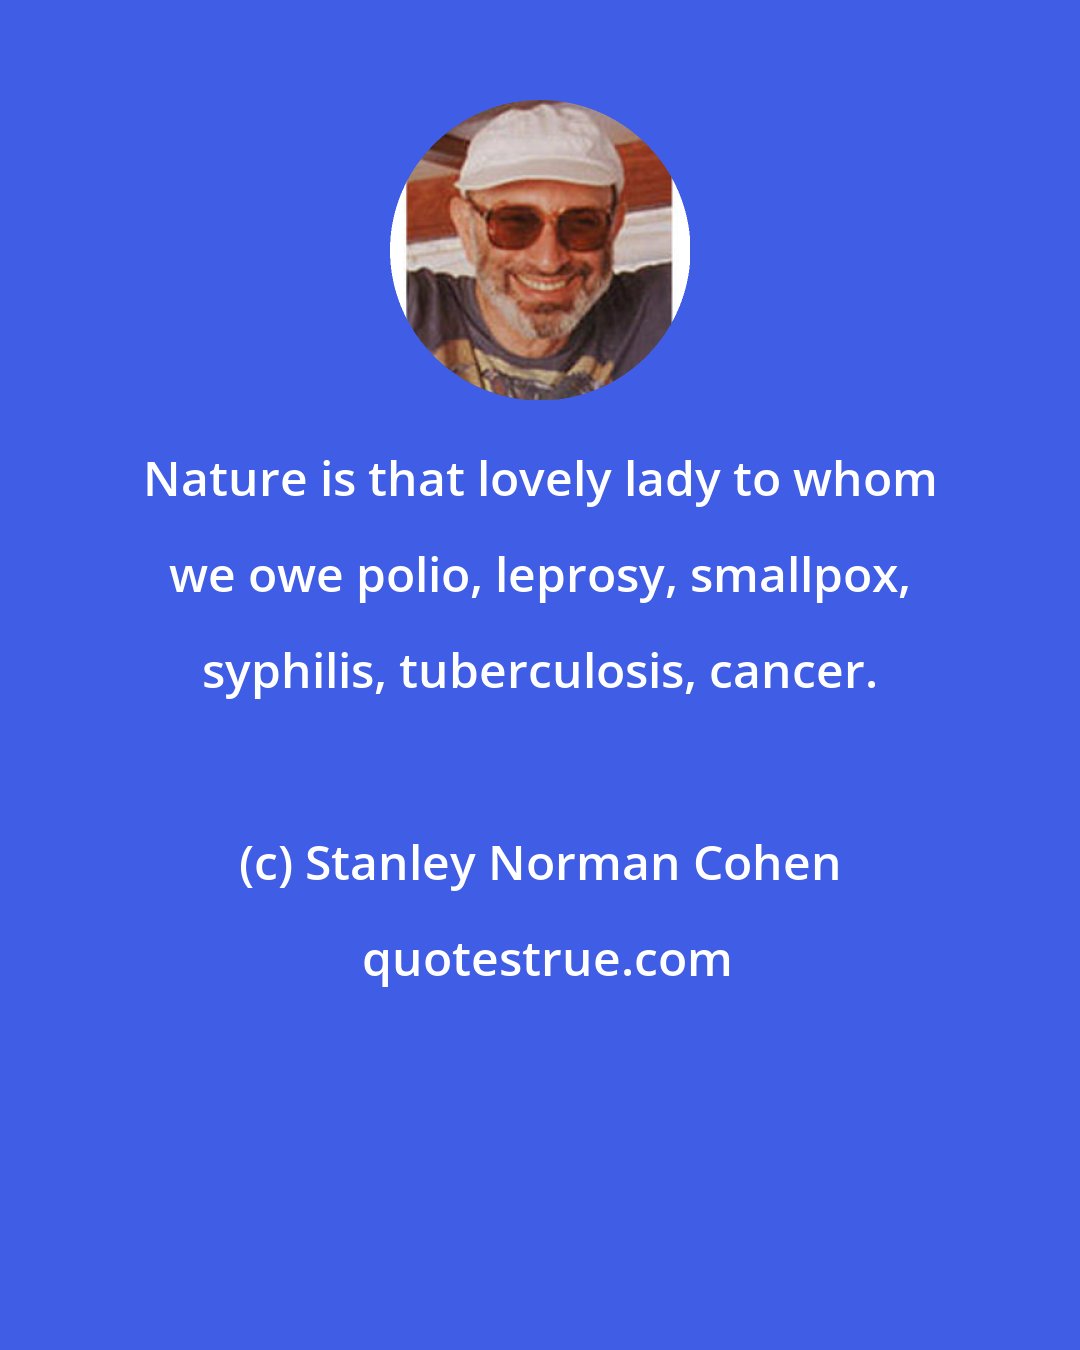 Stanley Norman Cohen: Nature is that lovely lady to whom we owe polio, leprosy, smallpox, syphilis, tuberculosis, cancer.